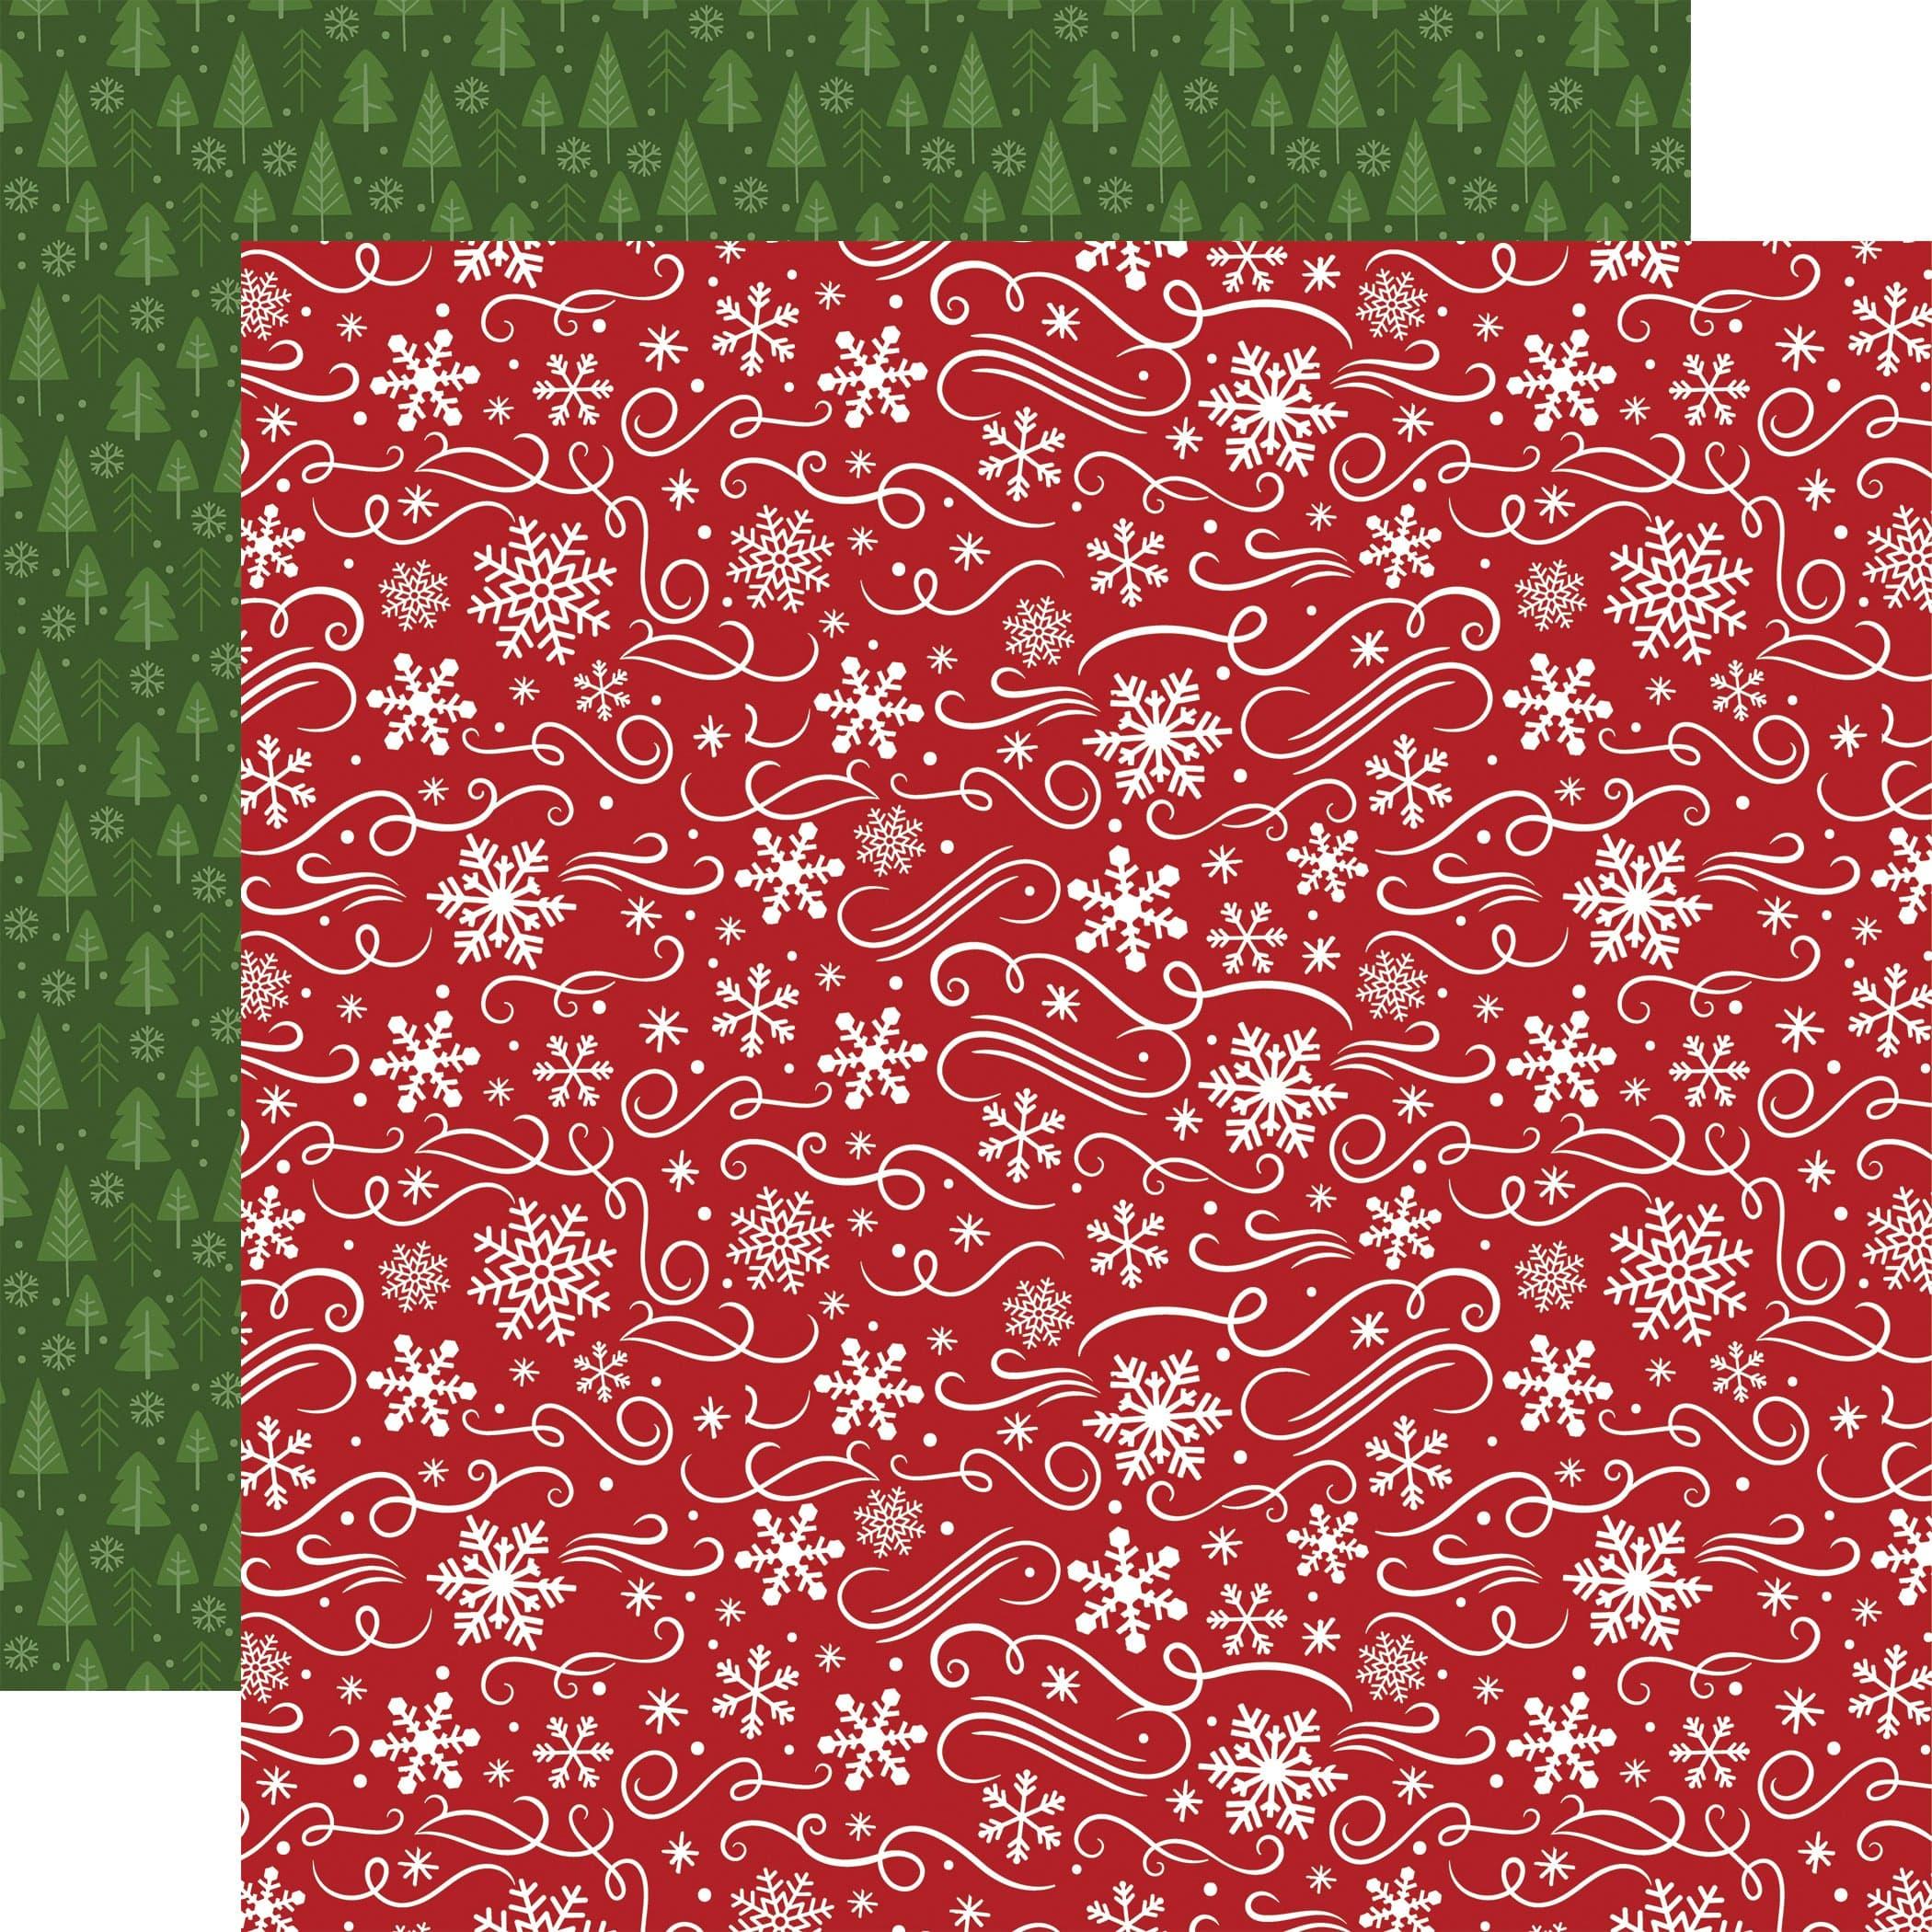 The Magic of Christmas Collection Spirit Of Snow 12 x 12 Double-Sided Scrapbook Paper by Echo Park Paper - Scrapbook Supply Companies